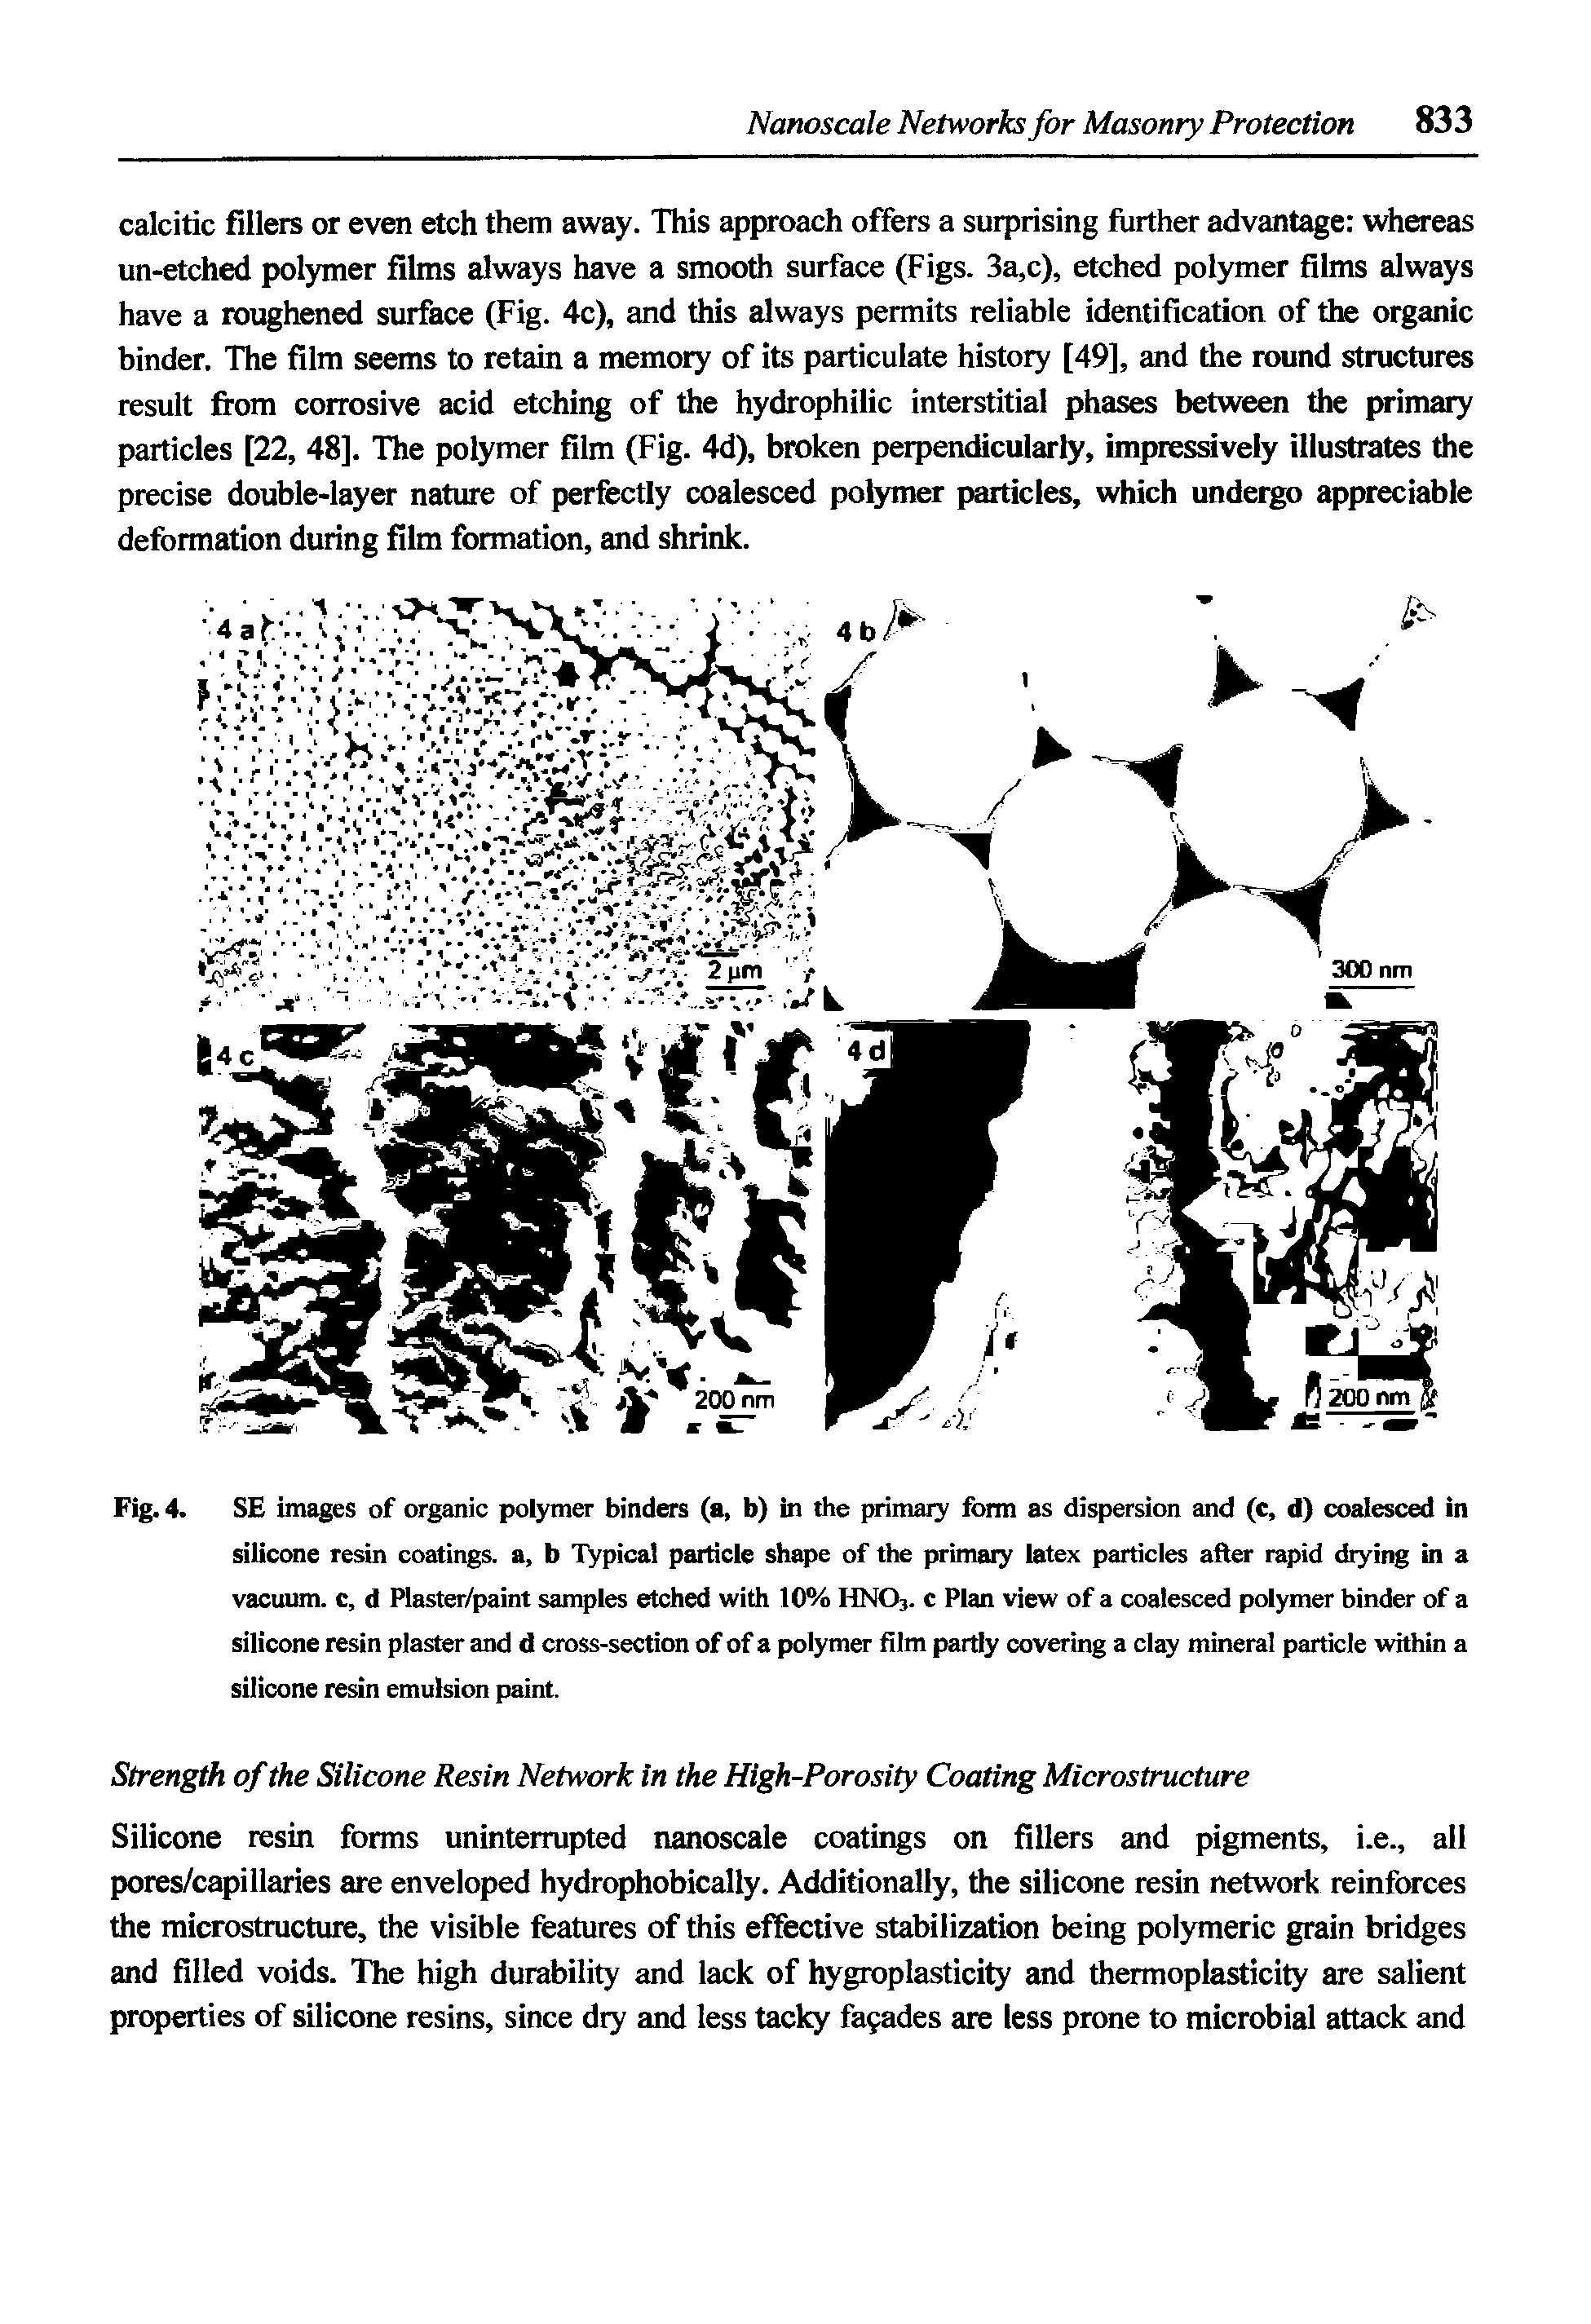 Fig. 4. SE images of organic polymer binders (a, b) in the primaiy form as dispersion and (c, d) coalesced in silicone resin coatings, a, b Typical particle shape of the primaiy latex particles after rapid diying in a vacuum, c, d Plaster/paint samples etched with 10% HNO3. c Plan view of a coalesced polymer binder of a silicone resin plaster and d cross-section of of a polymer film partly covering a clay mineral particle within a silicone resin emulsion paint.